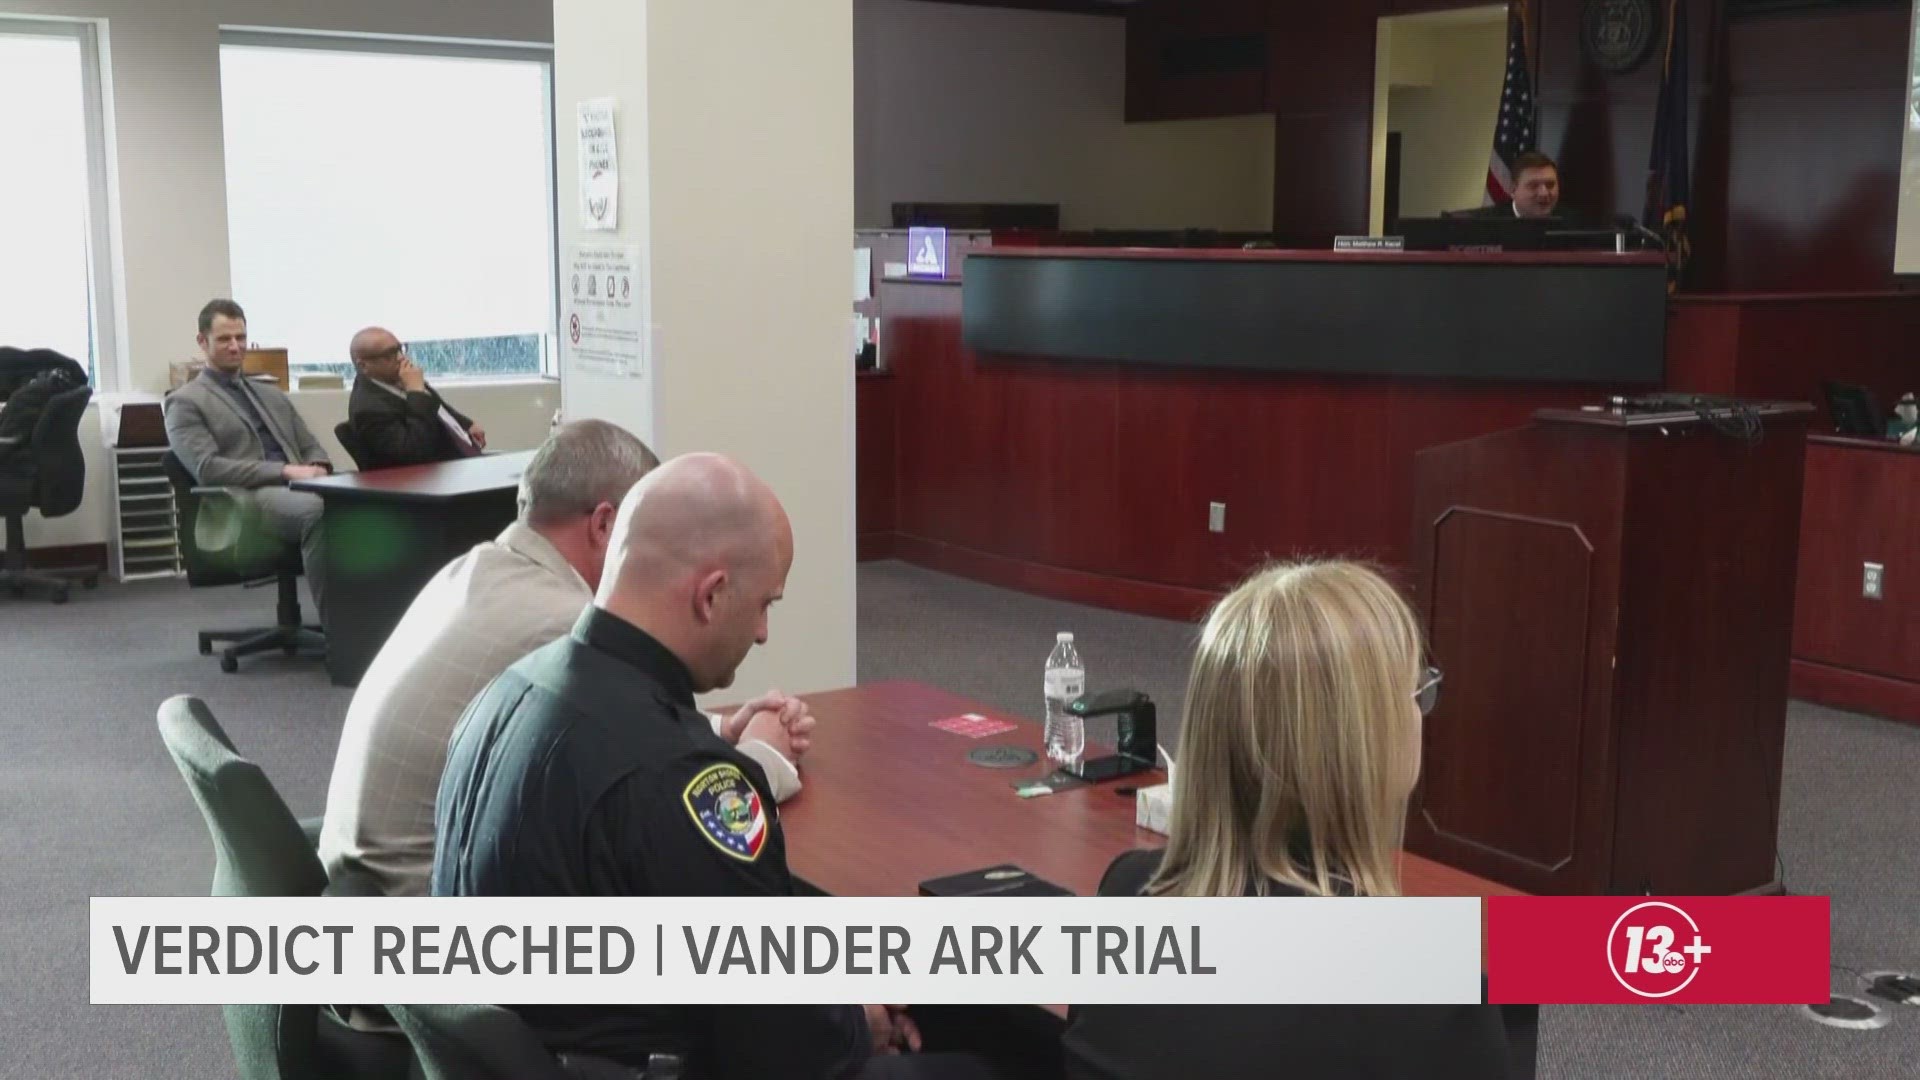 Shanda Vander Ark is guilty of the murder of her 15-year-old son Timothy Ferguson, the jury determined in about an hour of deliberation.